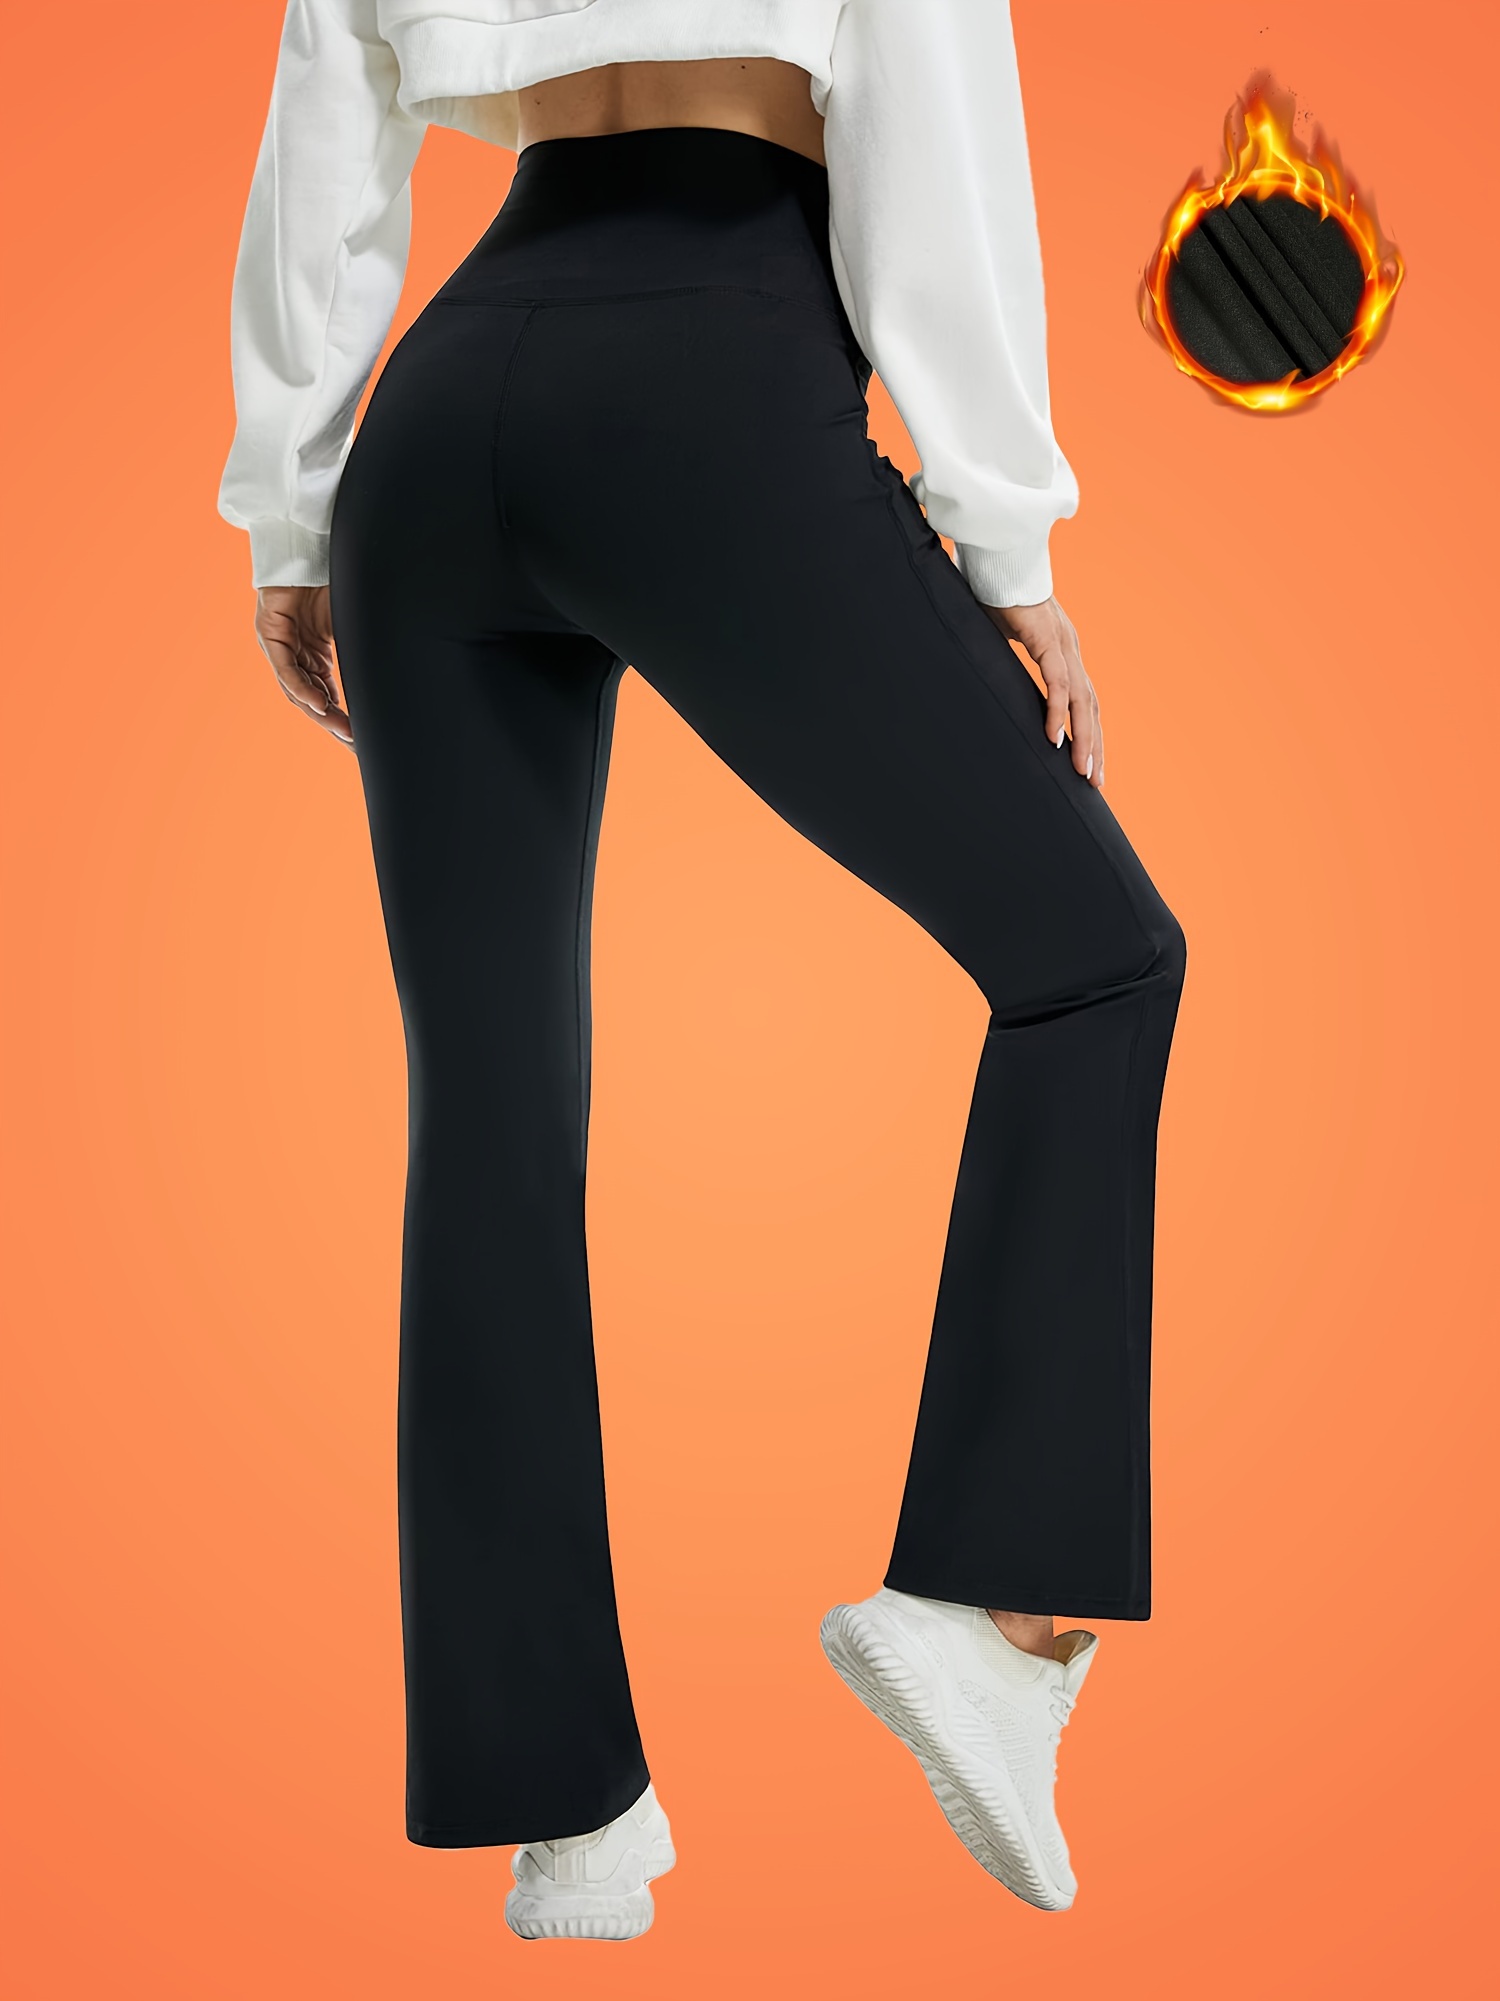 New Color Bell-Bottom Trousers High Waist and Hip Lifting Yoga